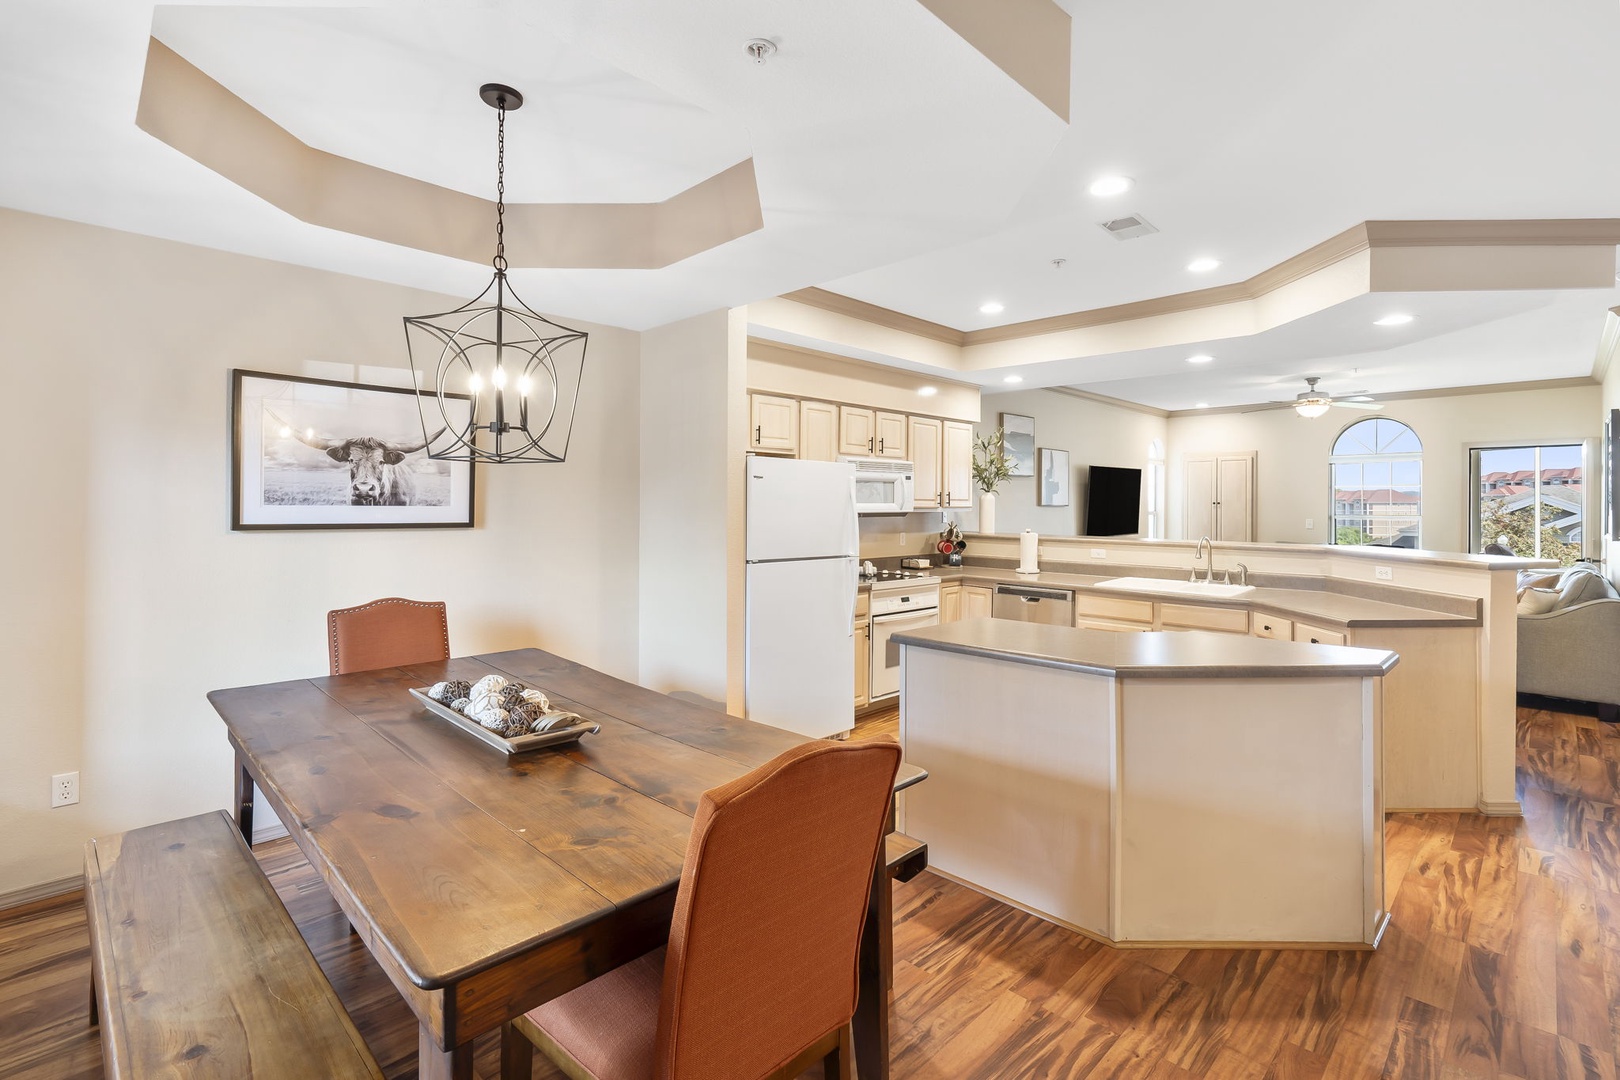 Enjoy the breezy, open layout between the dining/kitchen/living areas